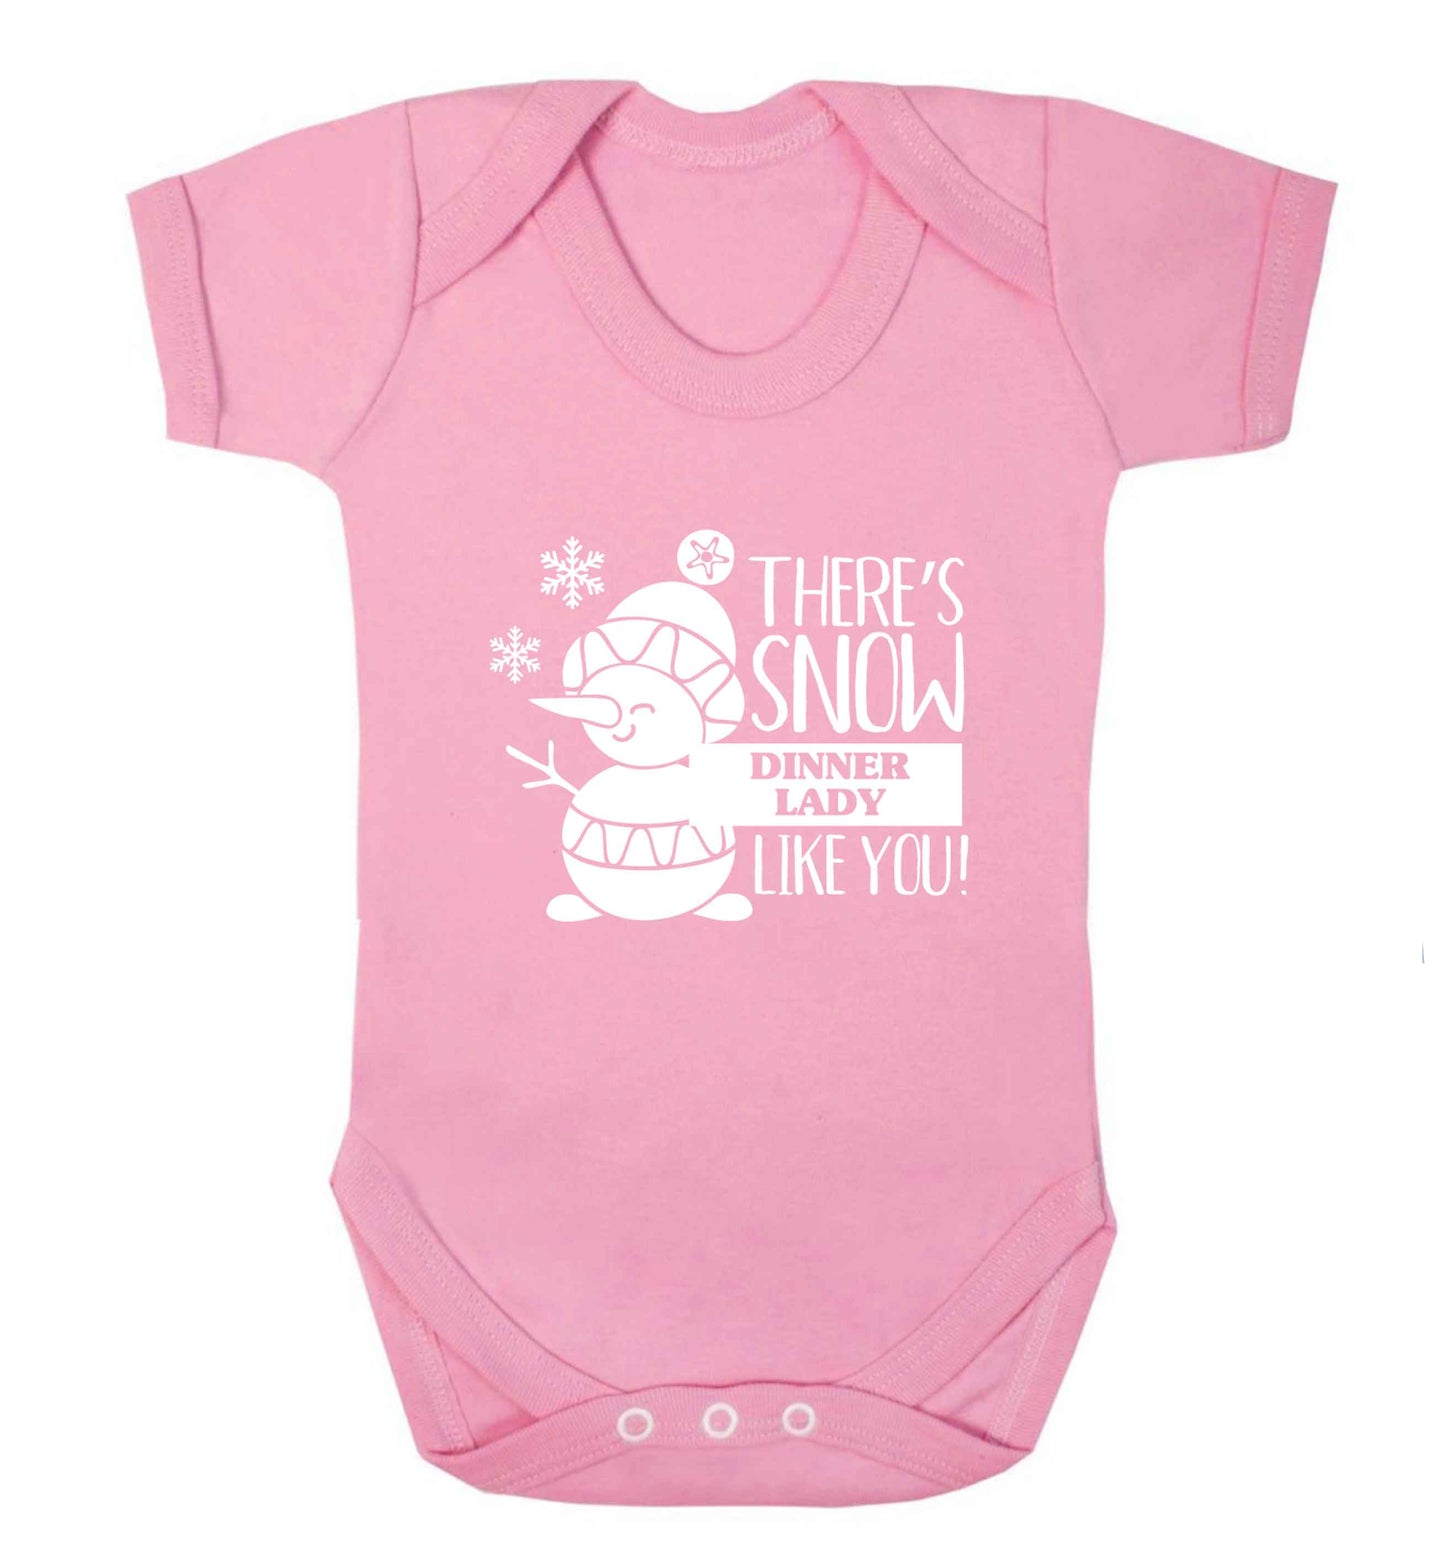 There's snow dinner lady like you baby vest pale pink 18-24 months